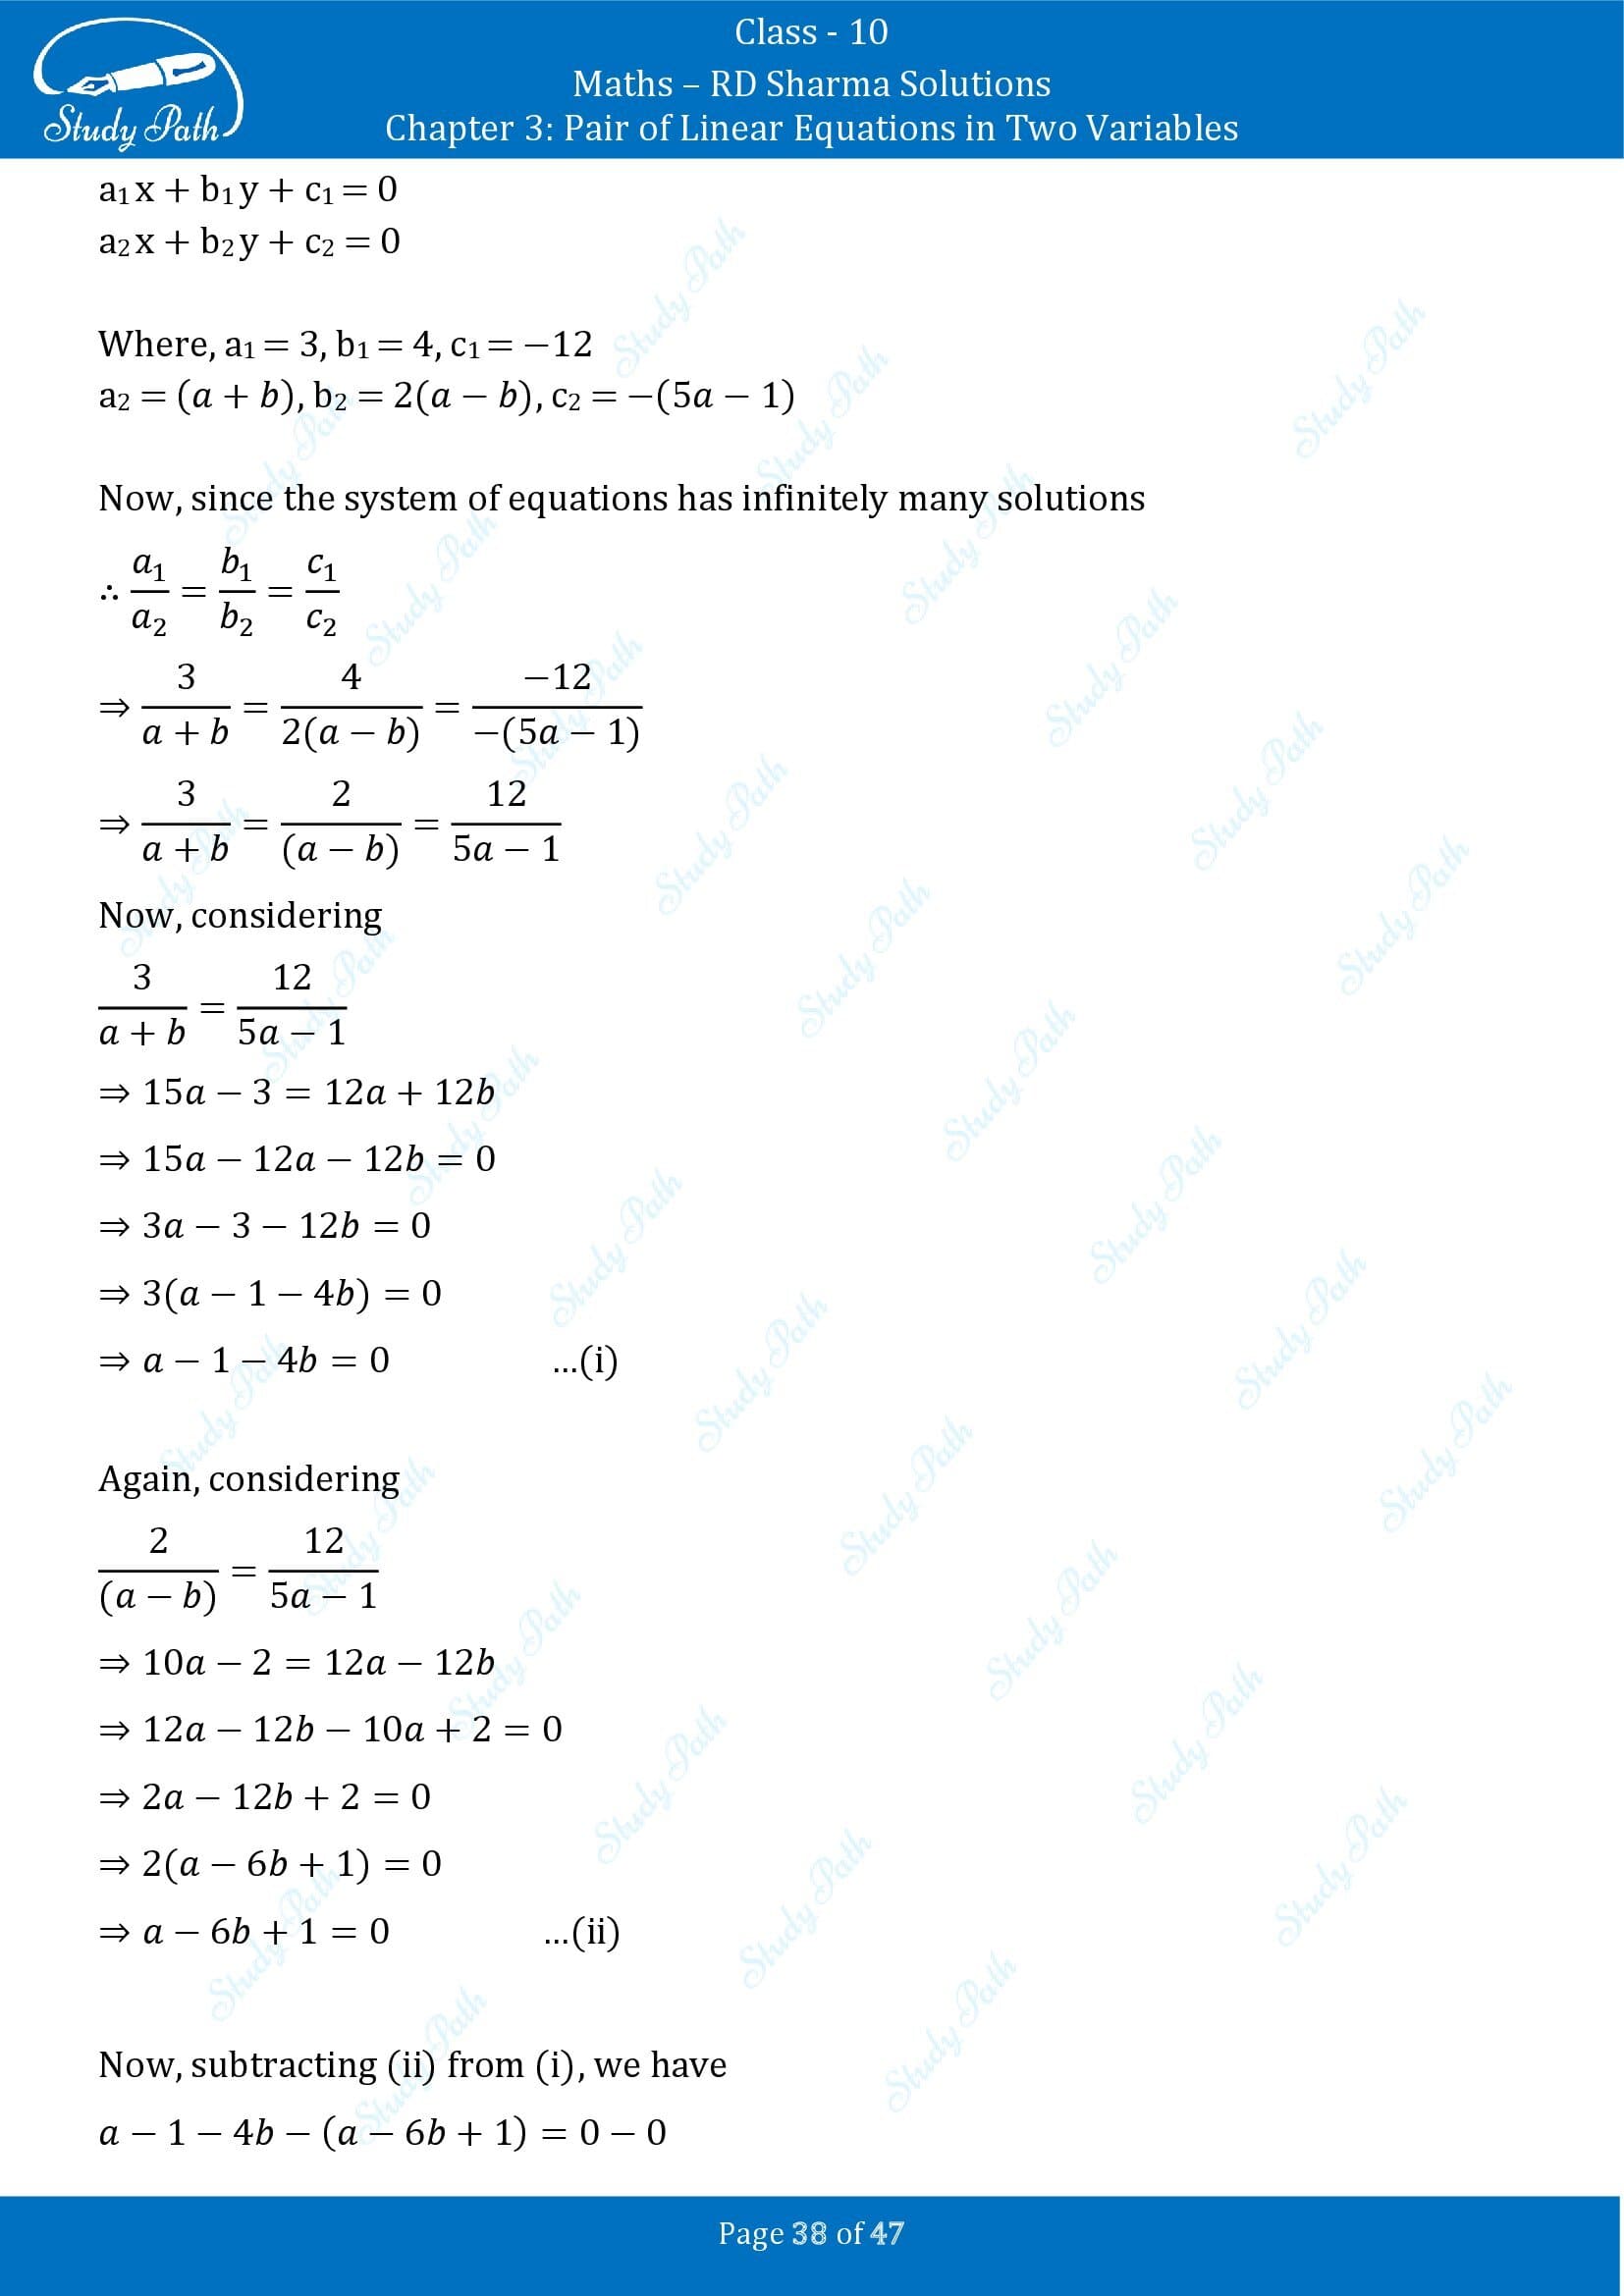 RD Sharma Solutions Class 10 Chapter 3 Pair of Linear Equations in Two Variables Exercise 3.5 00038